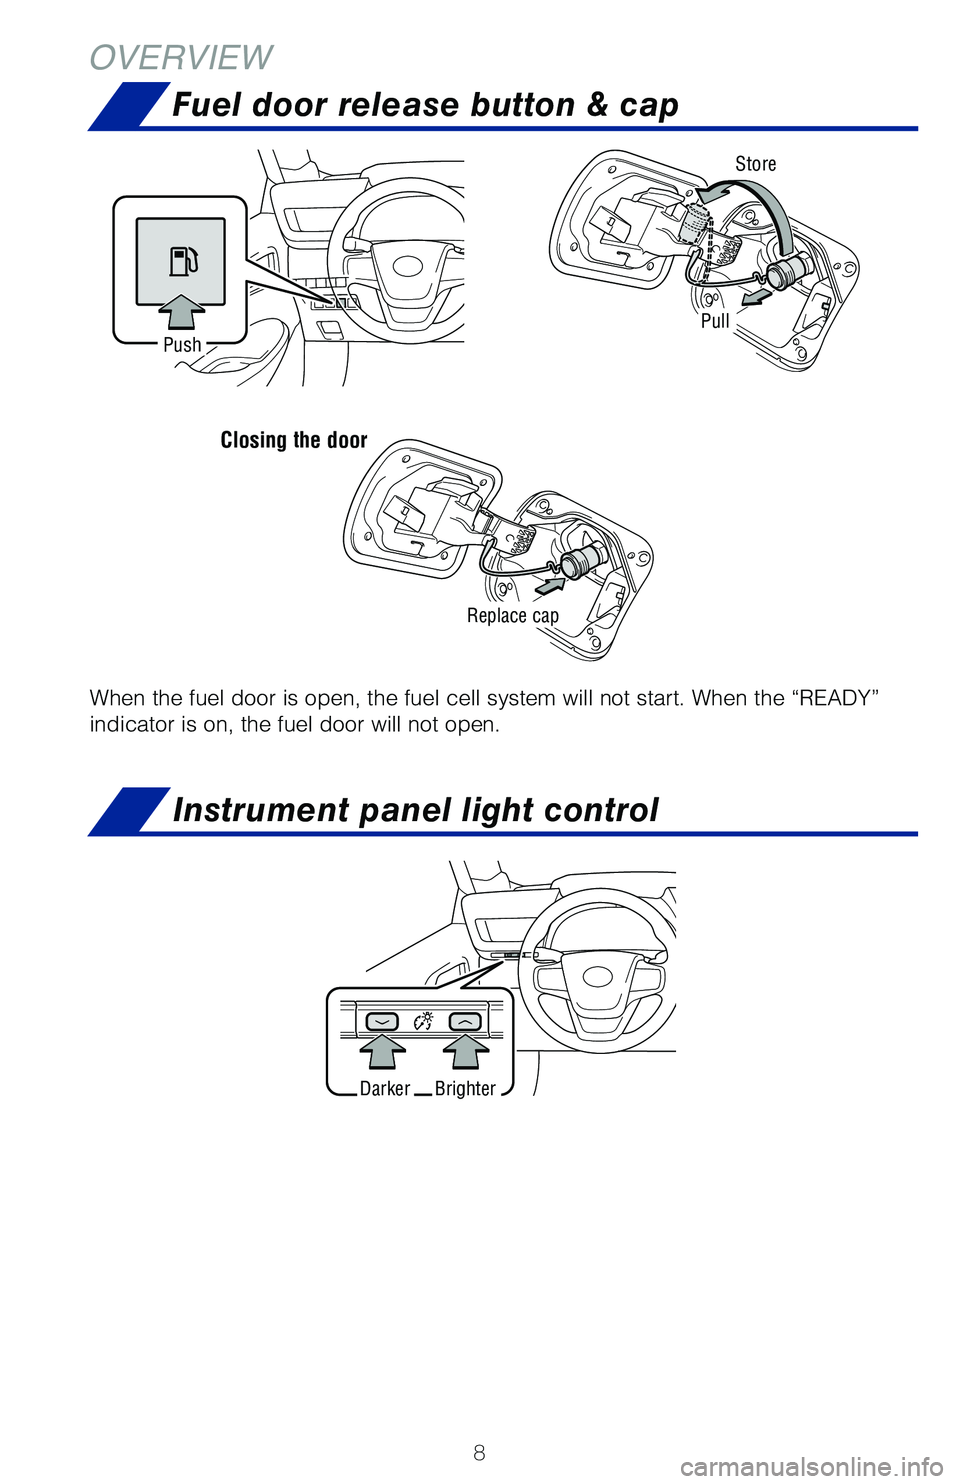 TOYOTA MIRAI 2021  Owners Manual (in English) 8
OVERVIEW
When the fuel door is open, the fuel cell system will not start. When th\
e “READY” 
indicator is on, the fuel door will not open.
PushStore
Replace cap
BrighterDarker
Pull
Closing the 